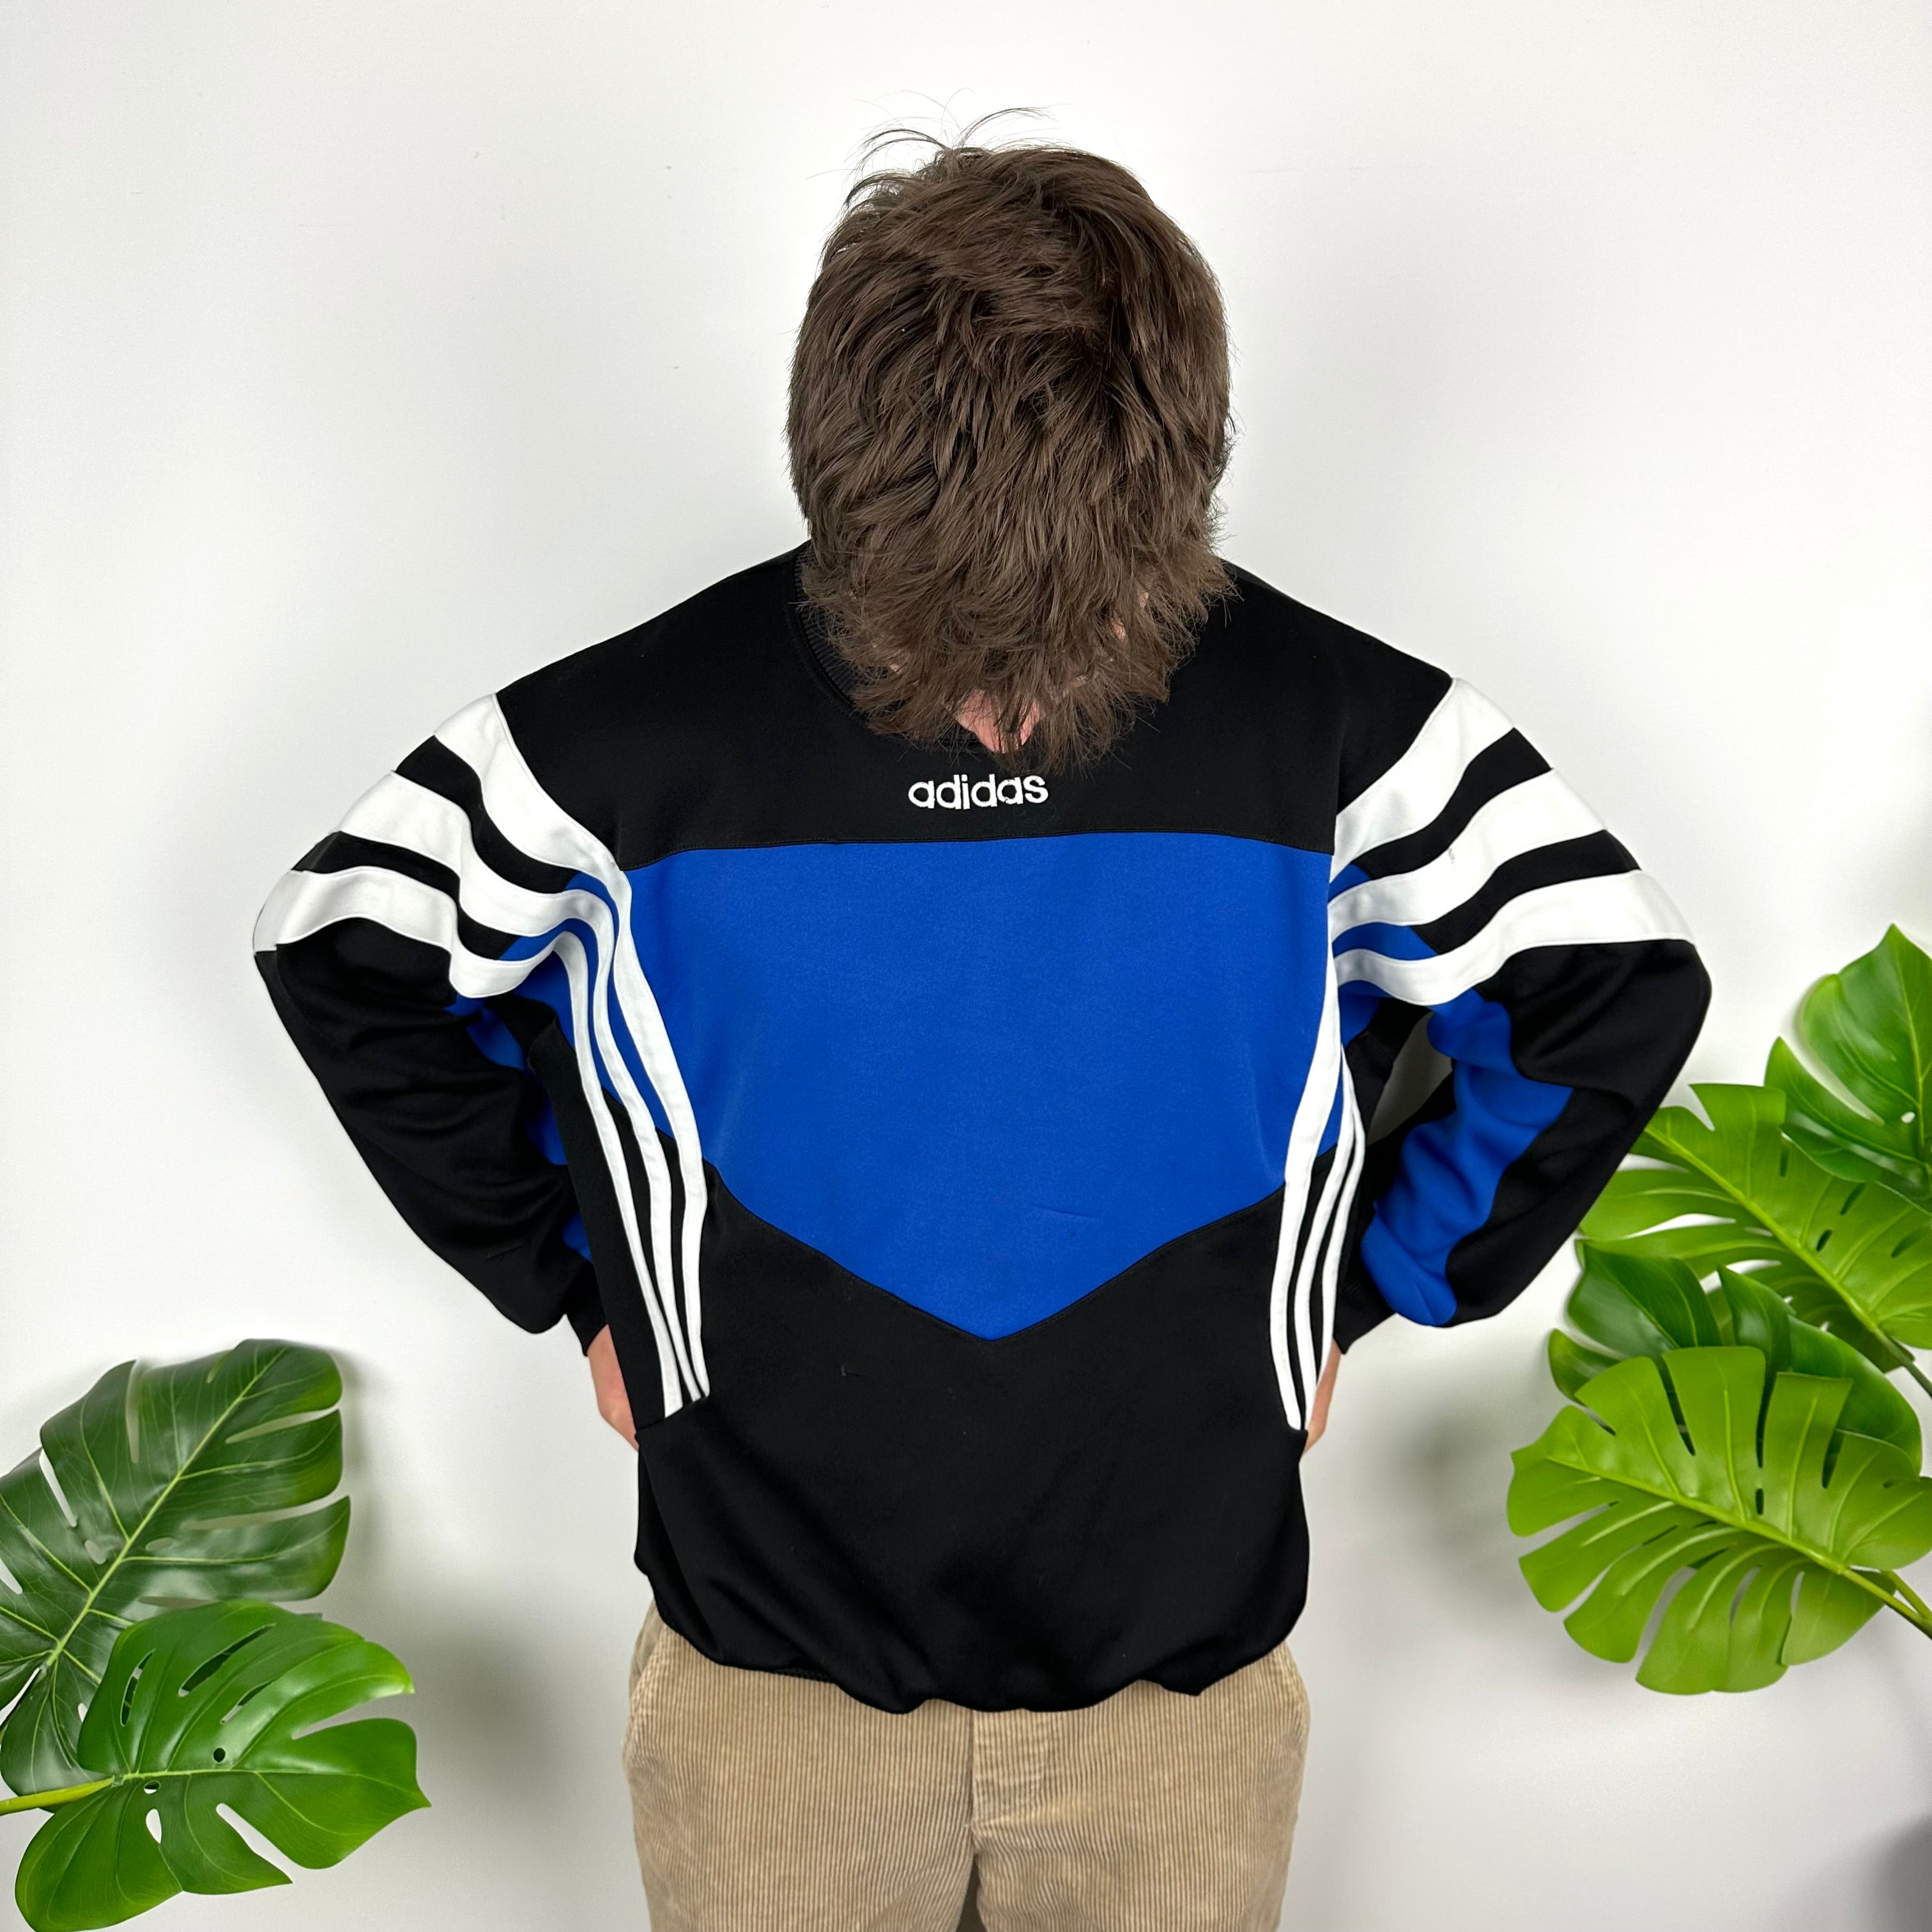 Adidas Black & Blue Embroidered Spell Out Colour Block Sweatshirt (L)